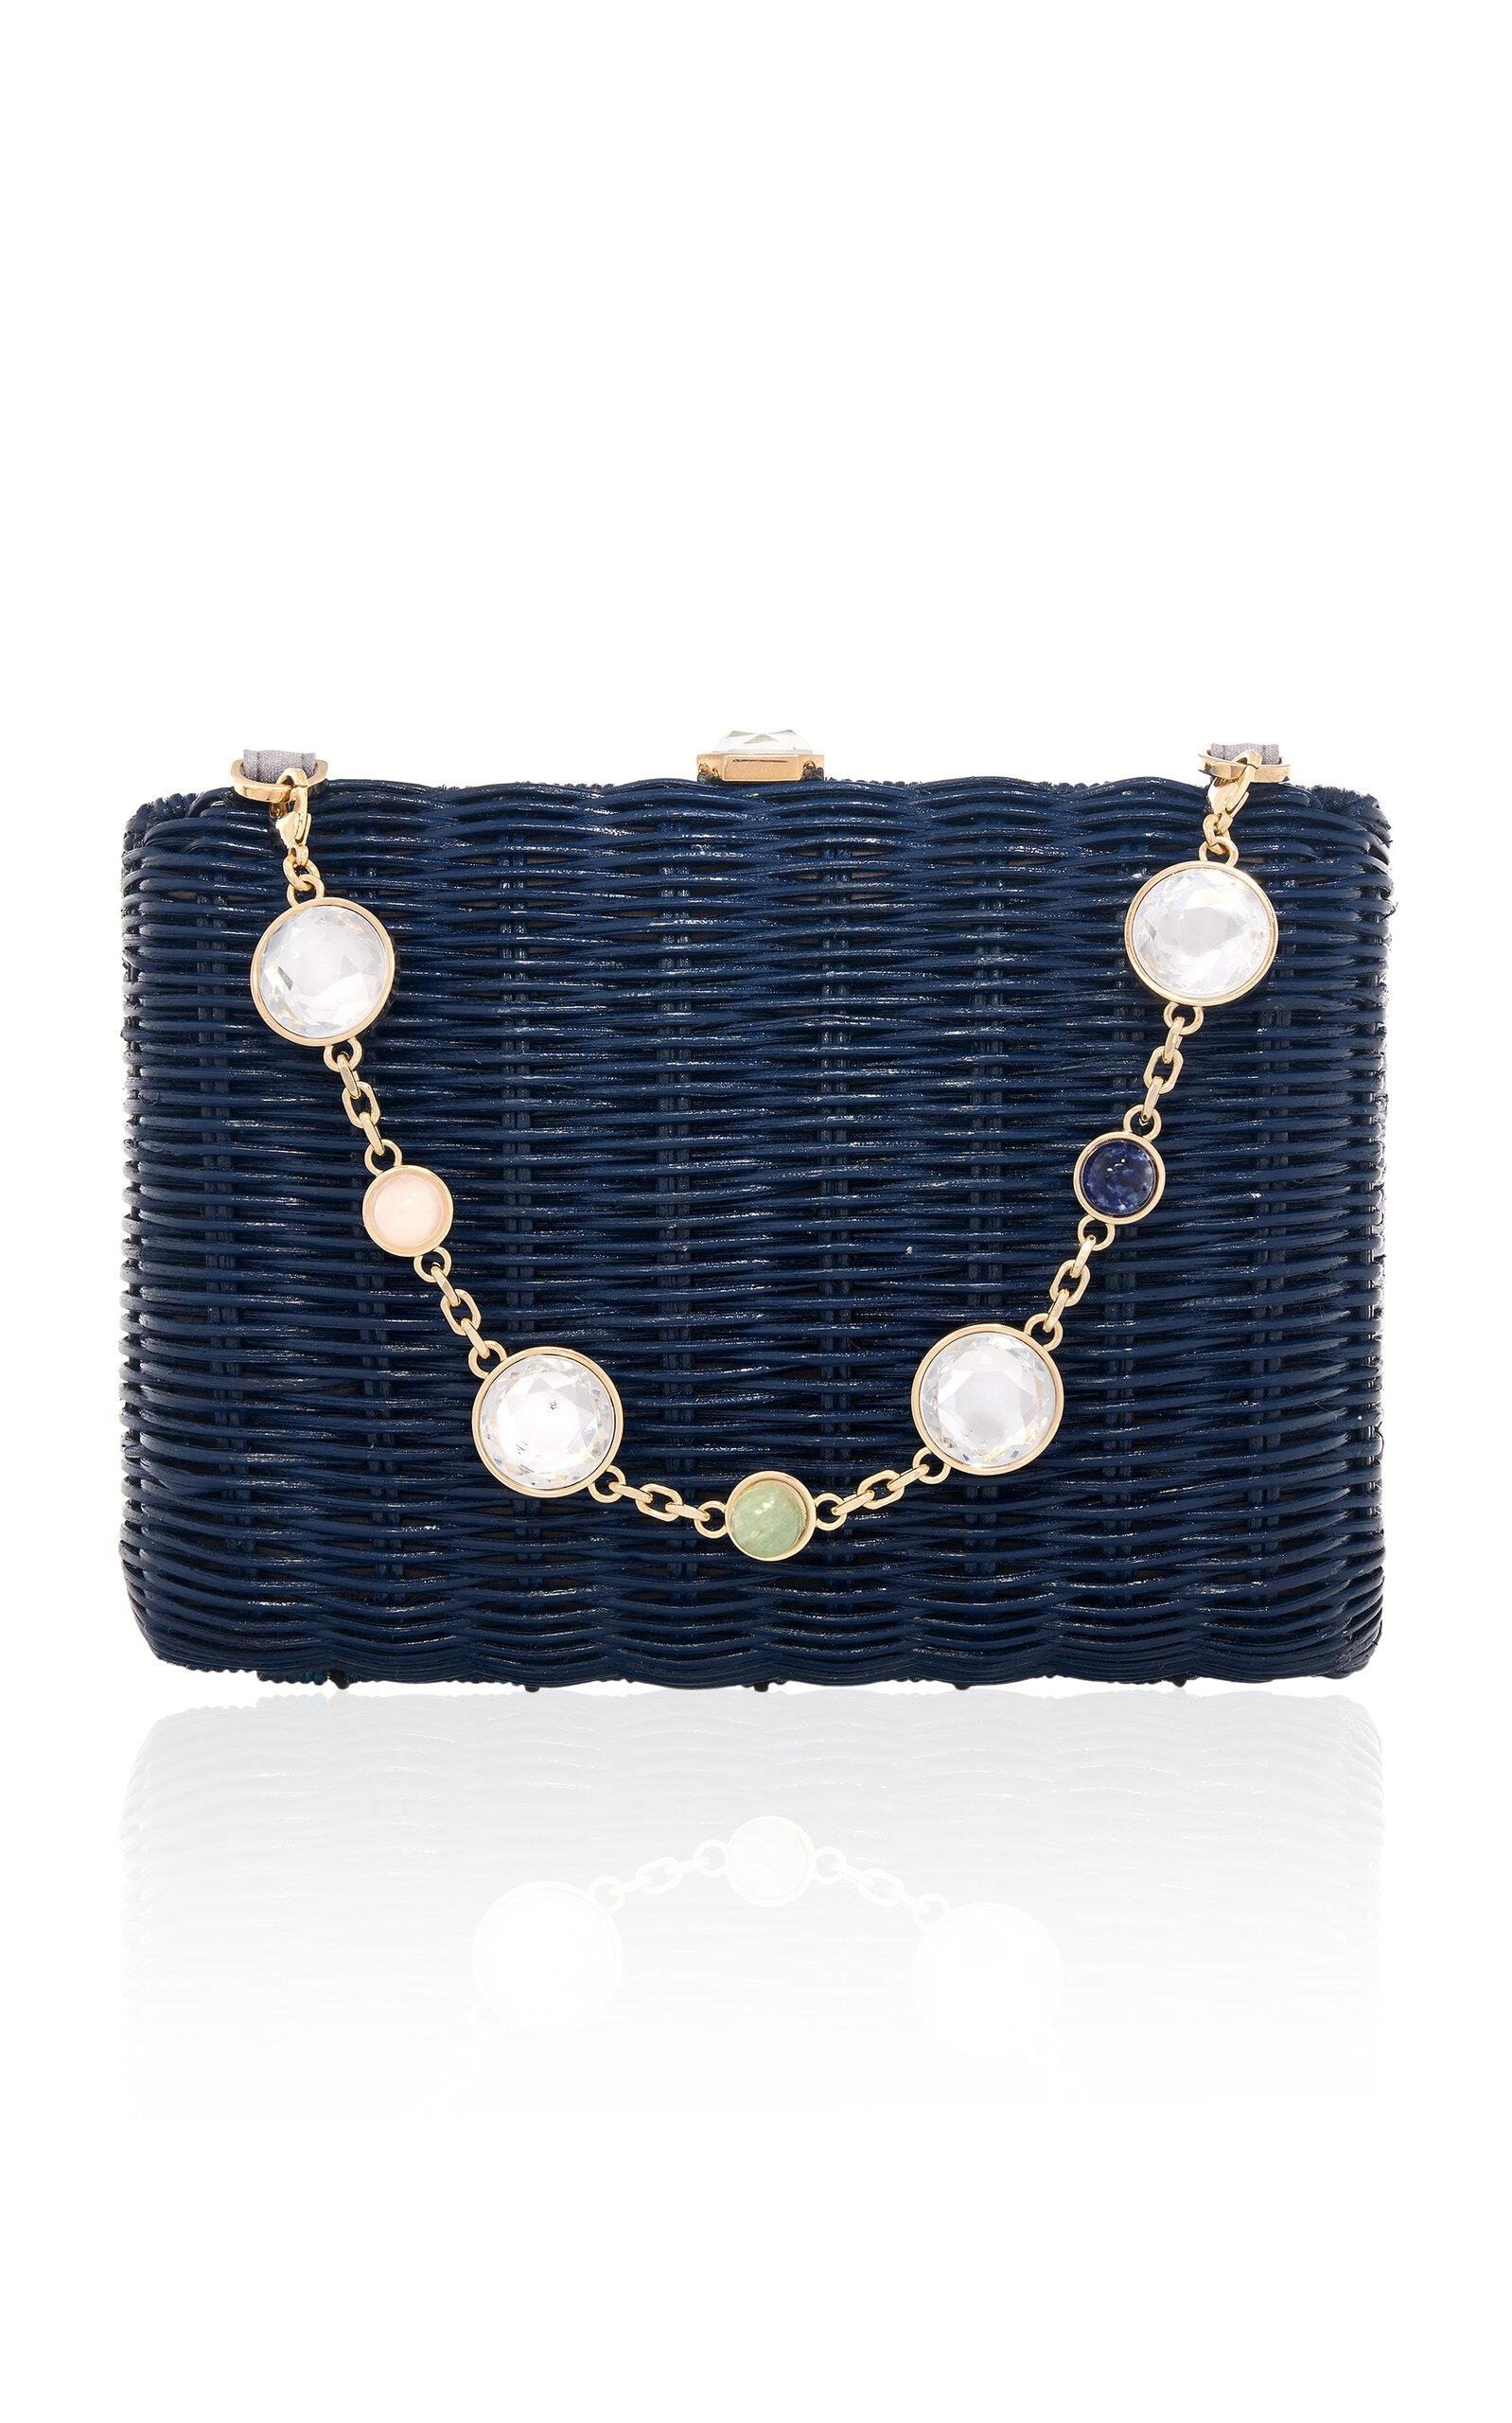 Judith Leiber Couture - Hailey Stone-Embellished Wicker Basket Clutch - Navy - OS - Only At Moda Operandi by JUDITH LEIBER COUTURE